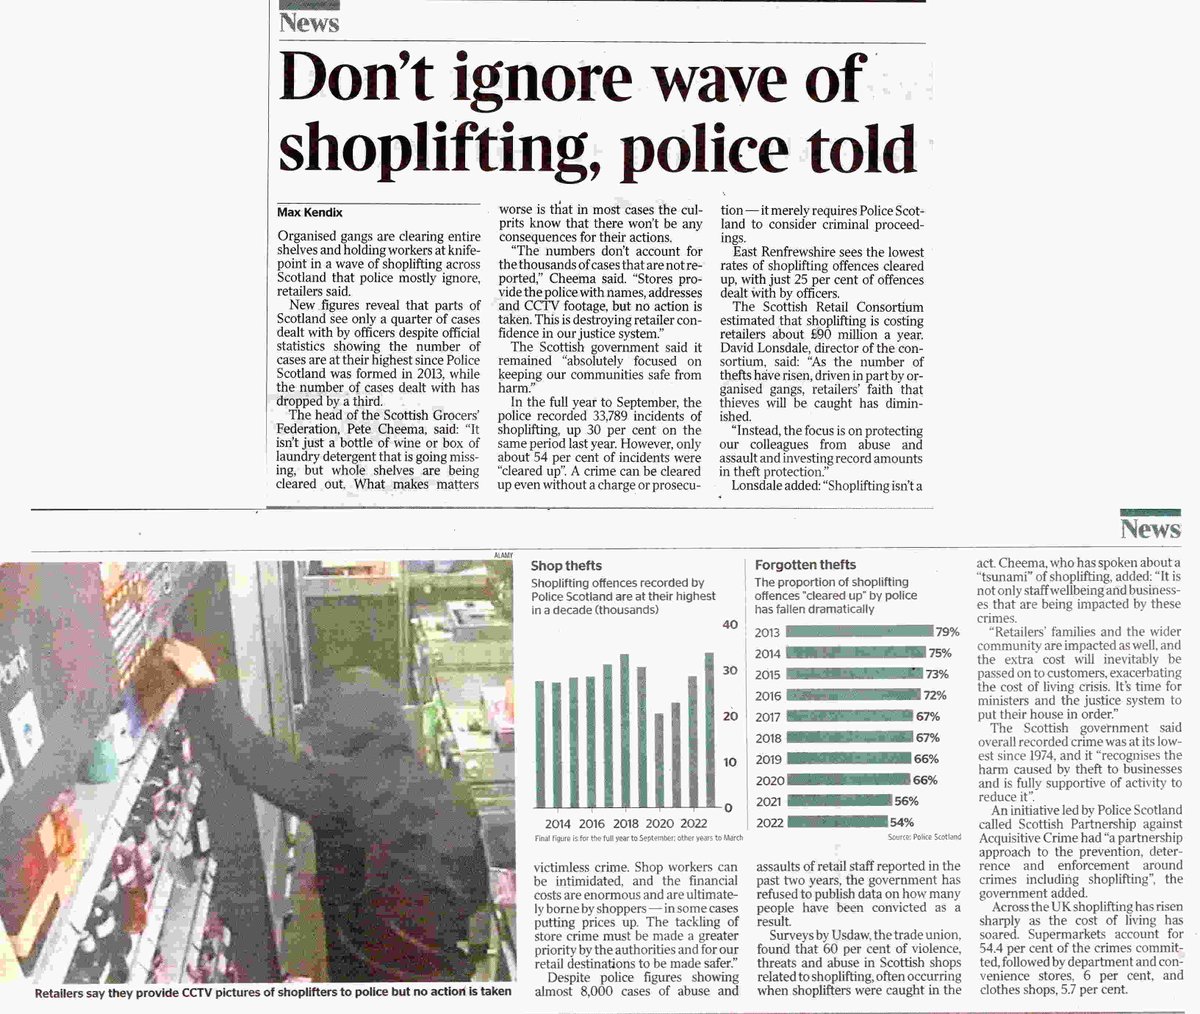 'Don’t ignore wave of shoplifting, retailers urge @PoliceScotland' 'Only a quarter of incidents are dealt with by officers in some areas, figures show' 🇬🇧 thetimes.co.uk/article/dont-i…